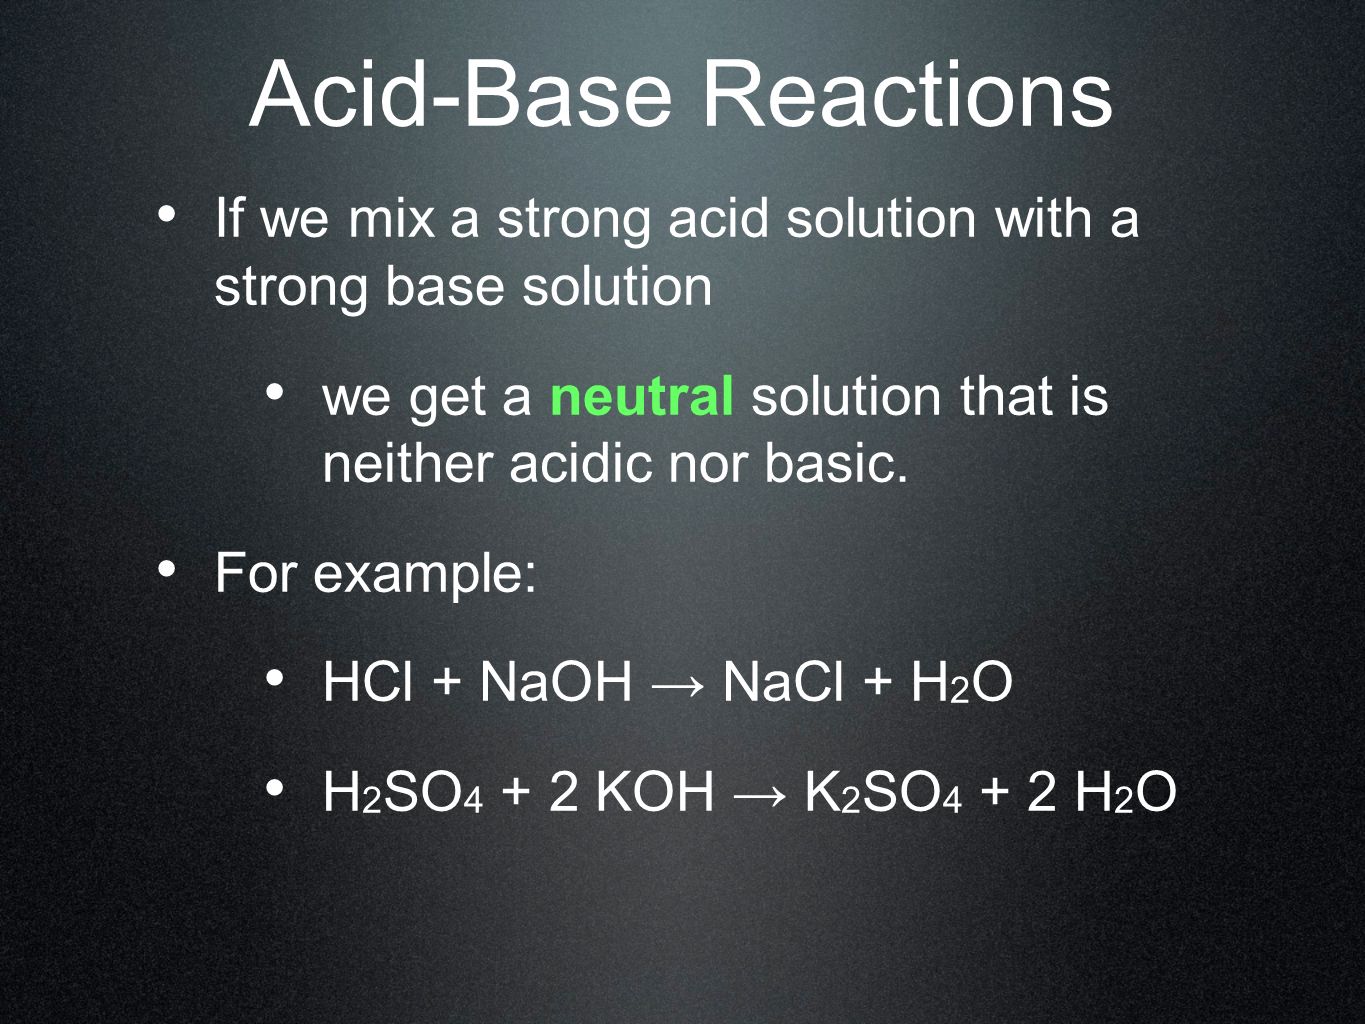 Acid-Base Reactions If we mix a strong acid solution with a strong base solution. we get a neutral solution that is neither acidic nor basic.